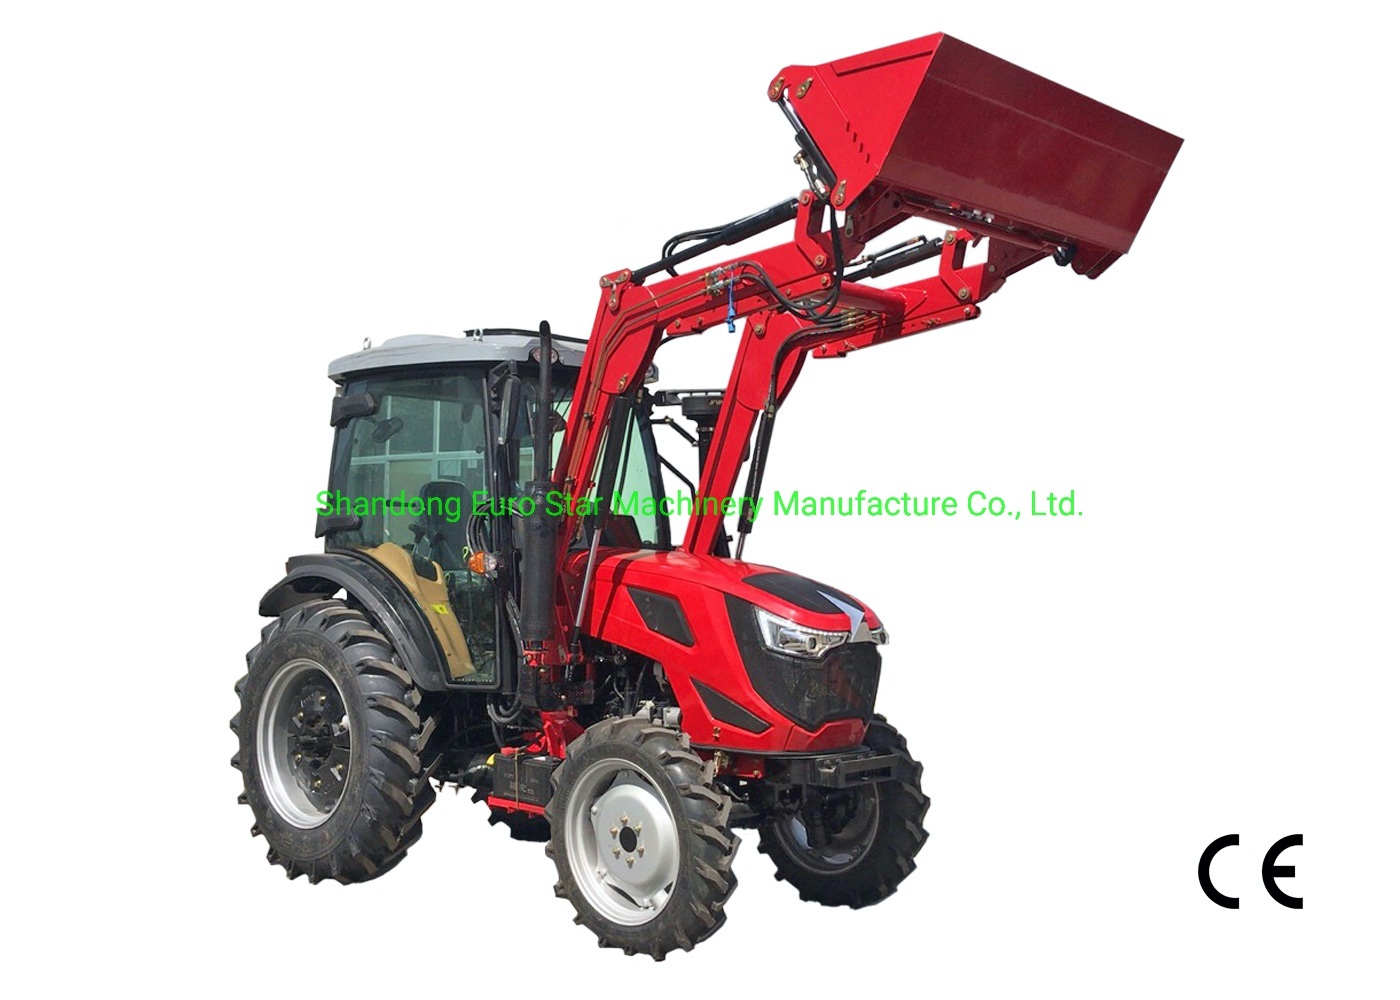 Tz-12-CE-25-200HP-Tractor-Front-End-Loader-Farm-Mini-Backhoe-Catch-Forklift-Grass-Fork-China-Agricultural-Machinery-Loader-for-Manufacturer-with-4-in-1-Bucket (2).jpg